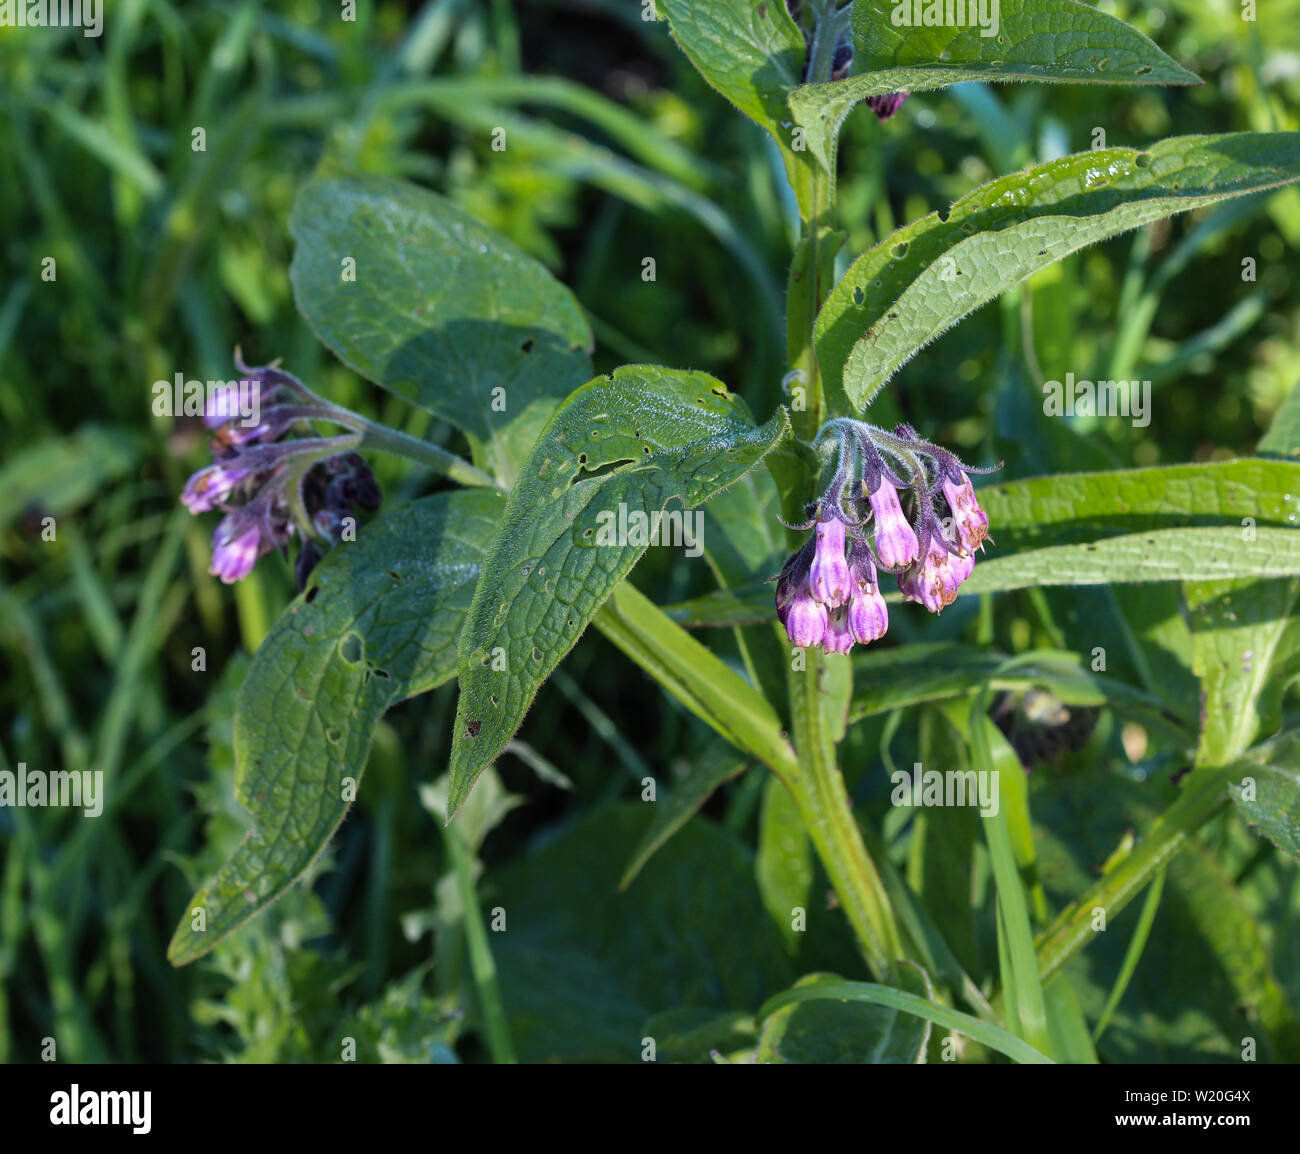 Close Up Of Wild Common Comfrey Or True Comfrey Symphytum Officinale Flower During Spring Stock Photo Alamy